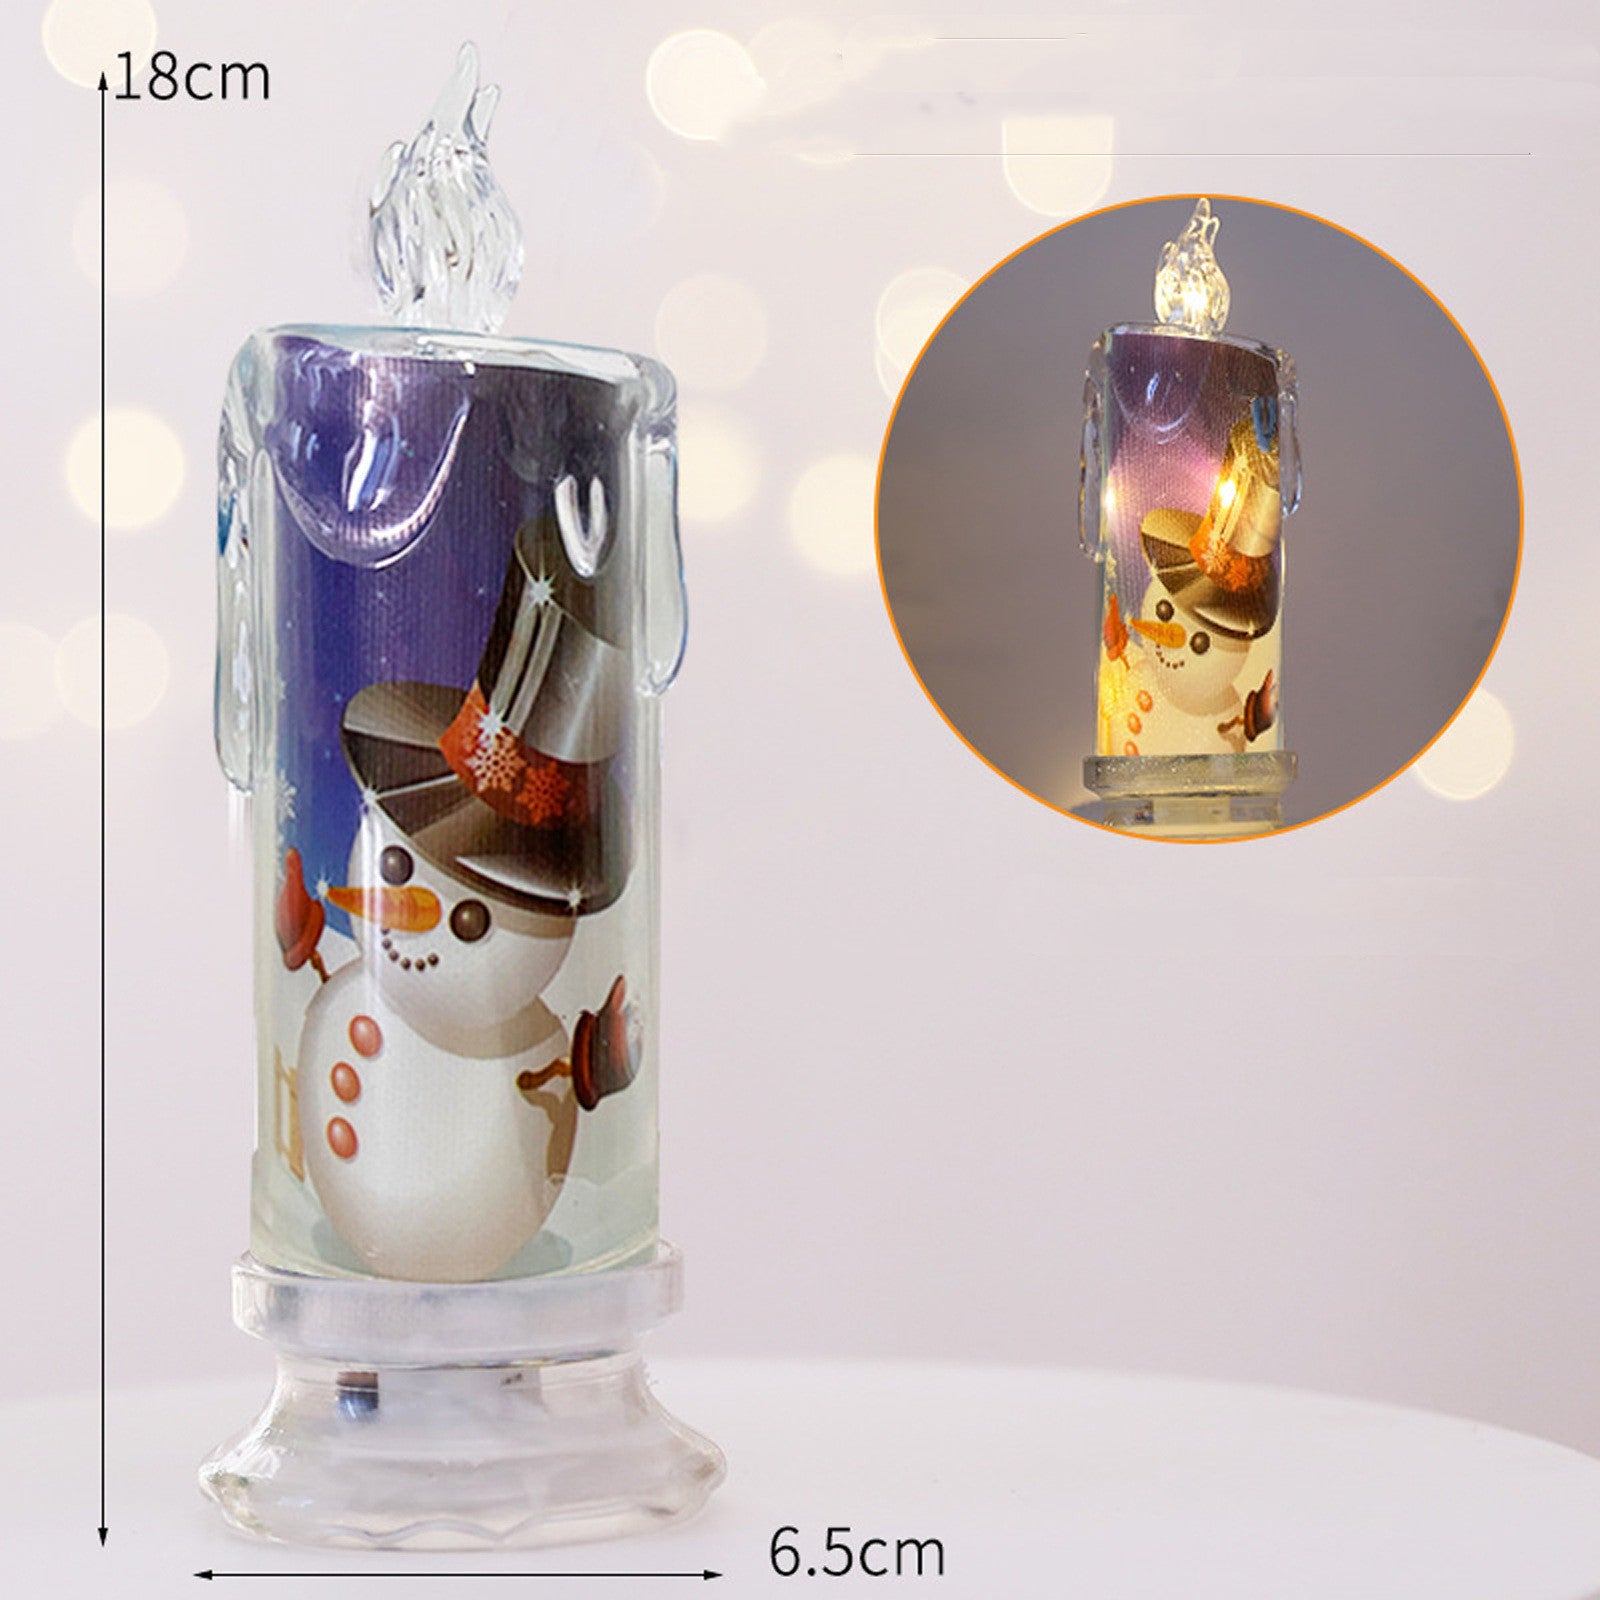 Christmas Transparent Electronic Candles Decorative Gifts, Christmas candles, window candles, advent candles, Christmas candle holder, Christmas window candles, Christmas tree candles, Christmas wax melts, Christmas scented candles and electric window candles.